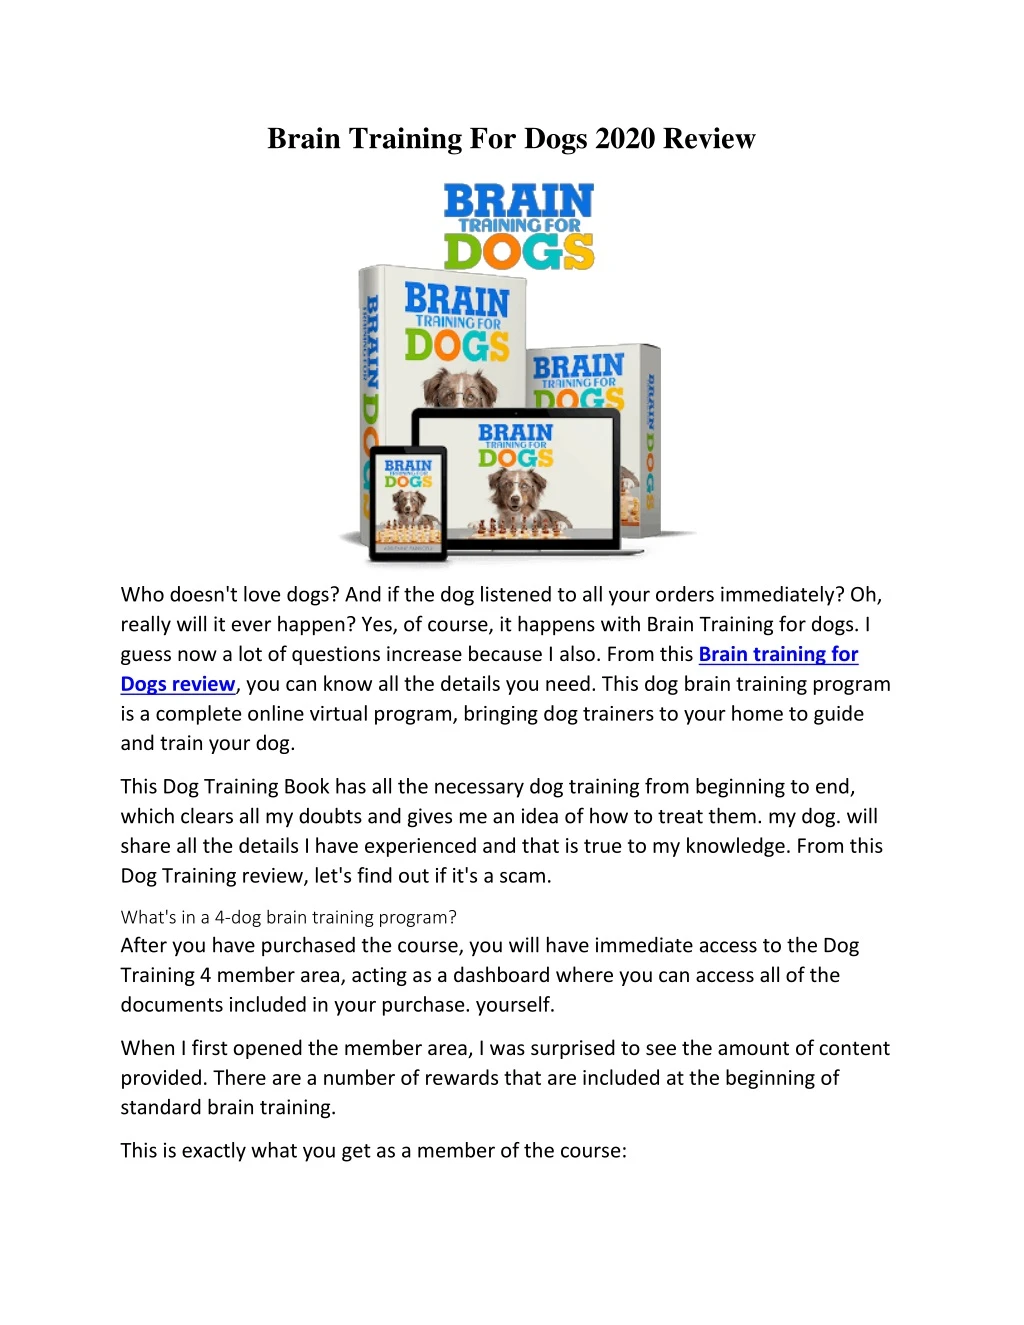 brain training for dogs 2020 review